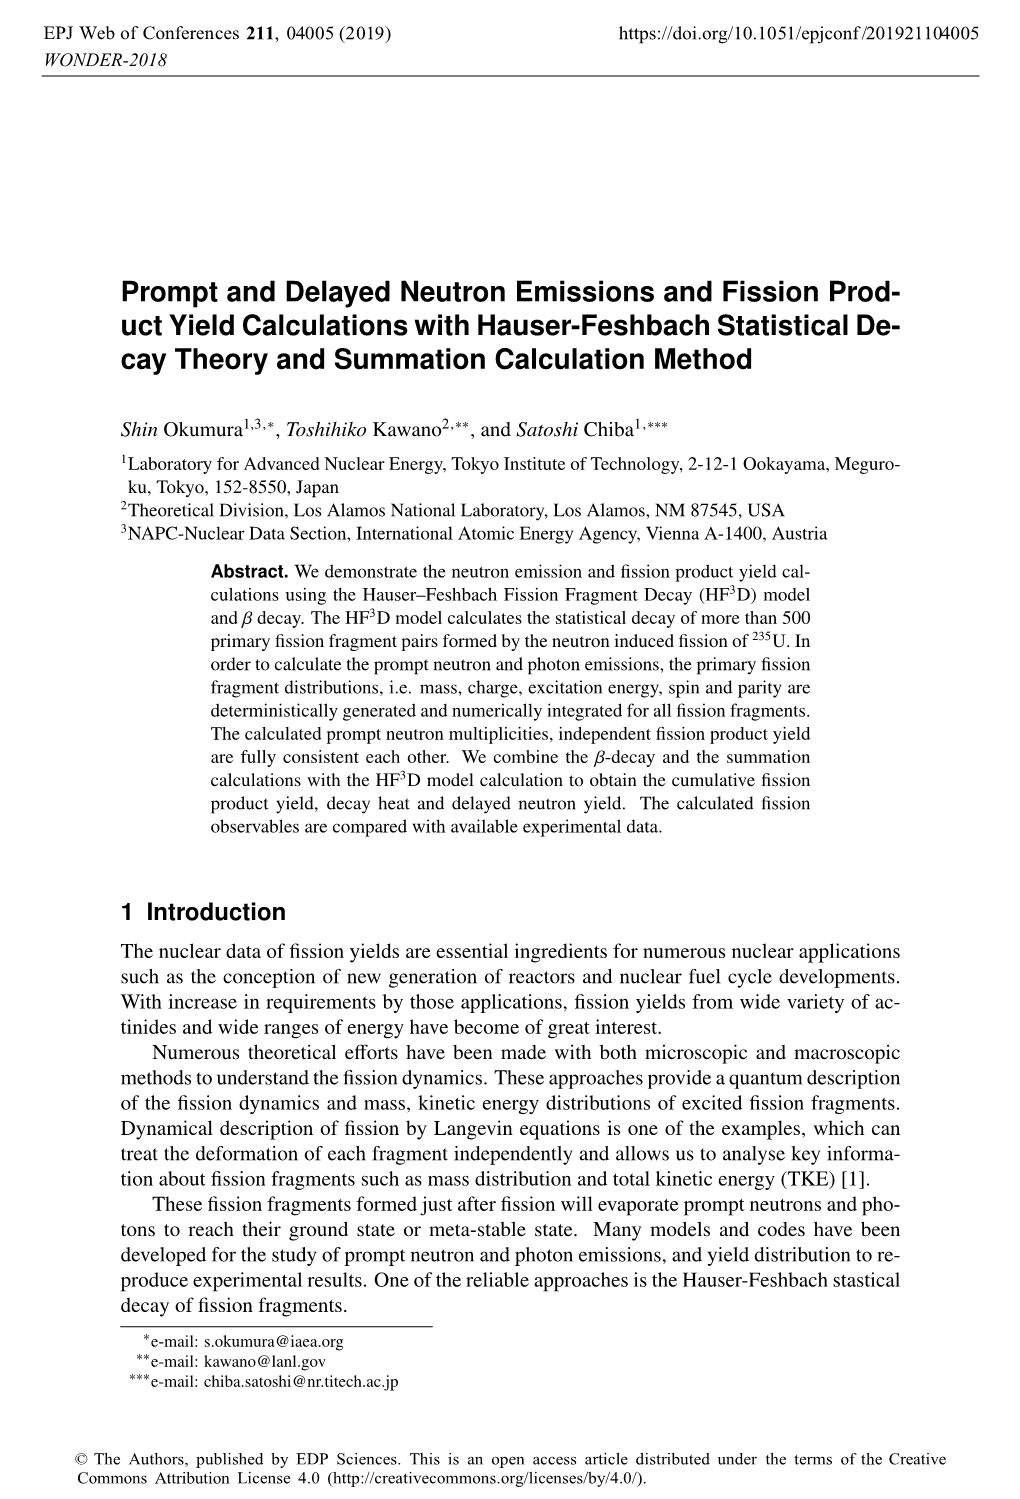 Prompt and Delayed Neutron Emissions and Fission Prod- Uct Yield Calculations with Hauser-Feshbach Statistical De- Cay Theory and Summation Calculation Method